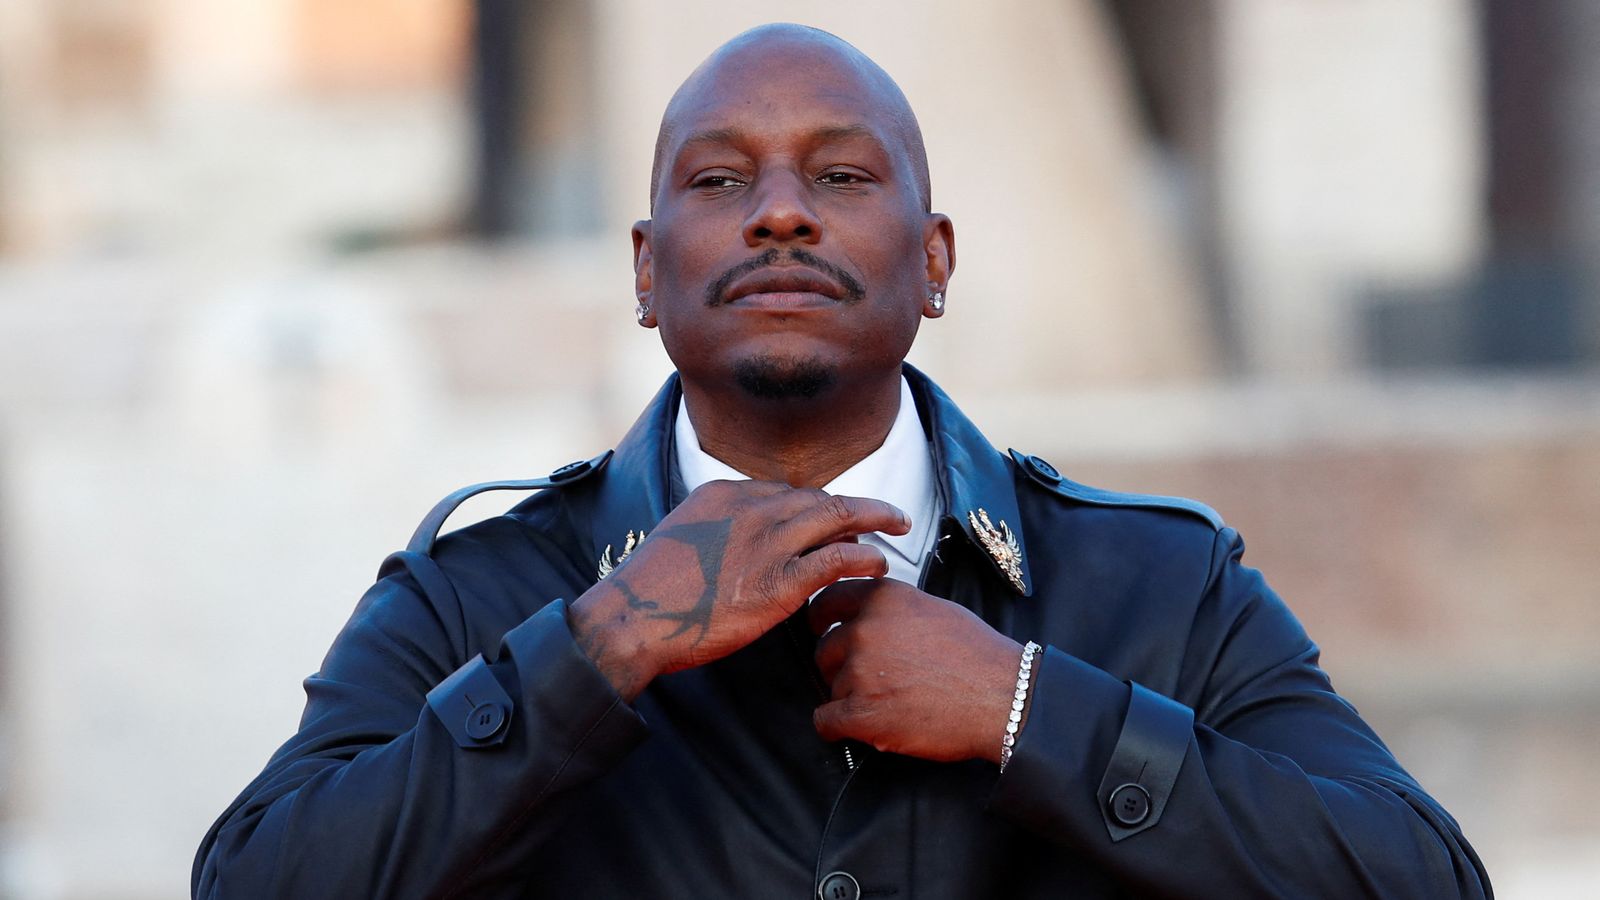 Fast & Furious star Tyrese Gibson sues The Home Depot for m after 'racial profiling'